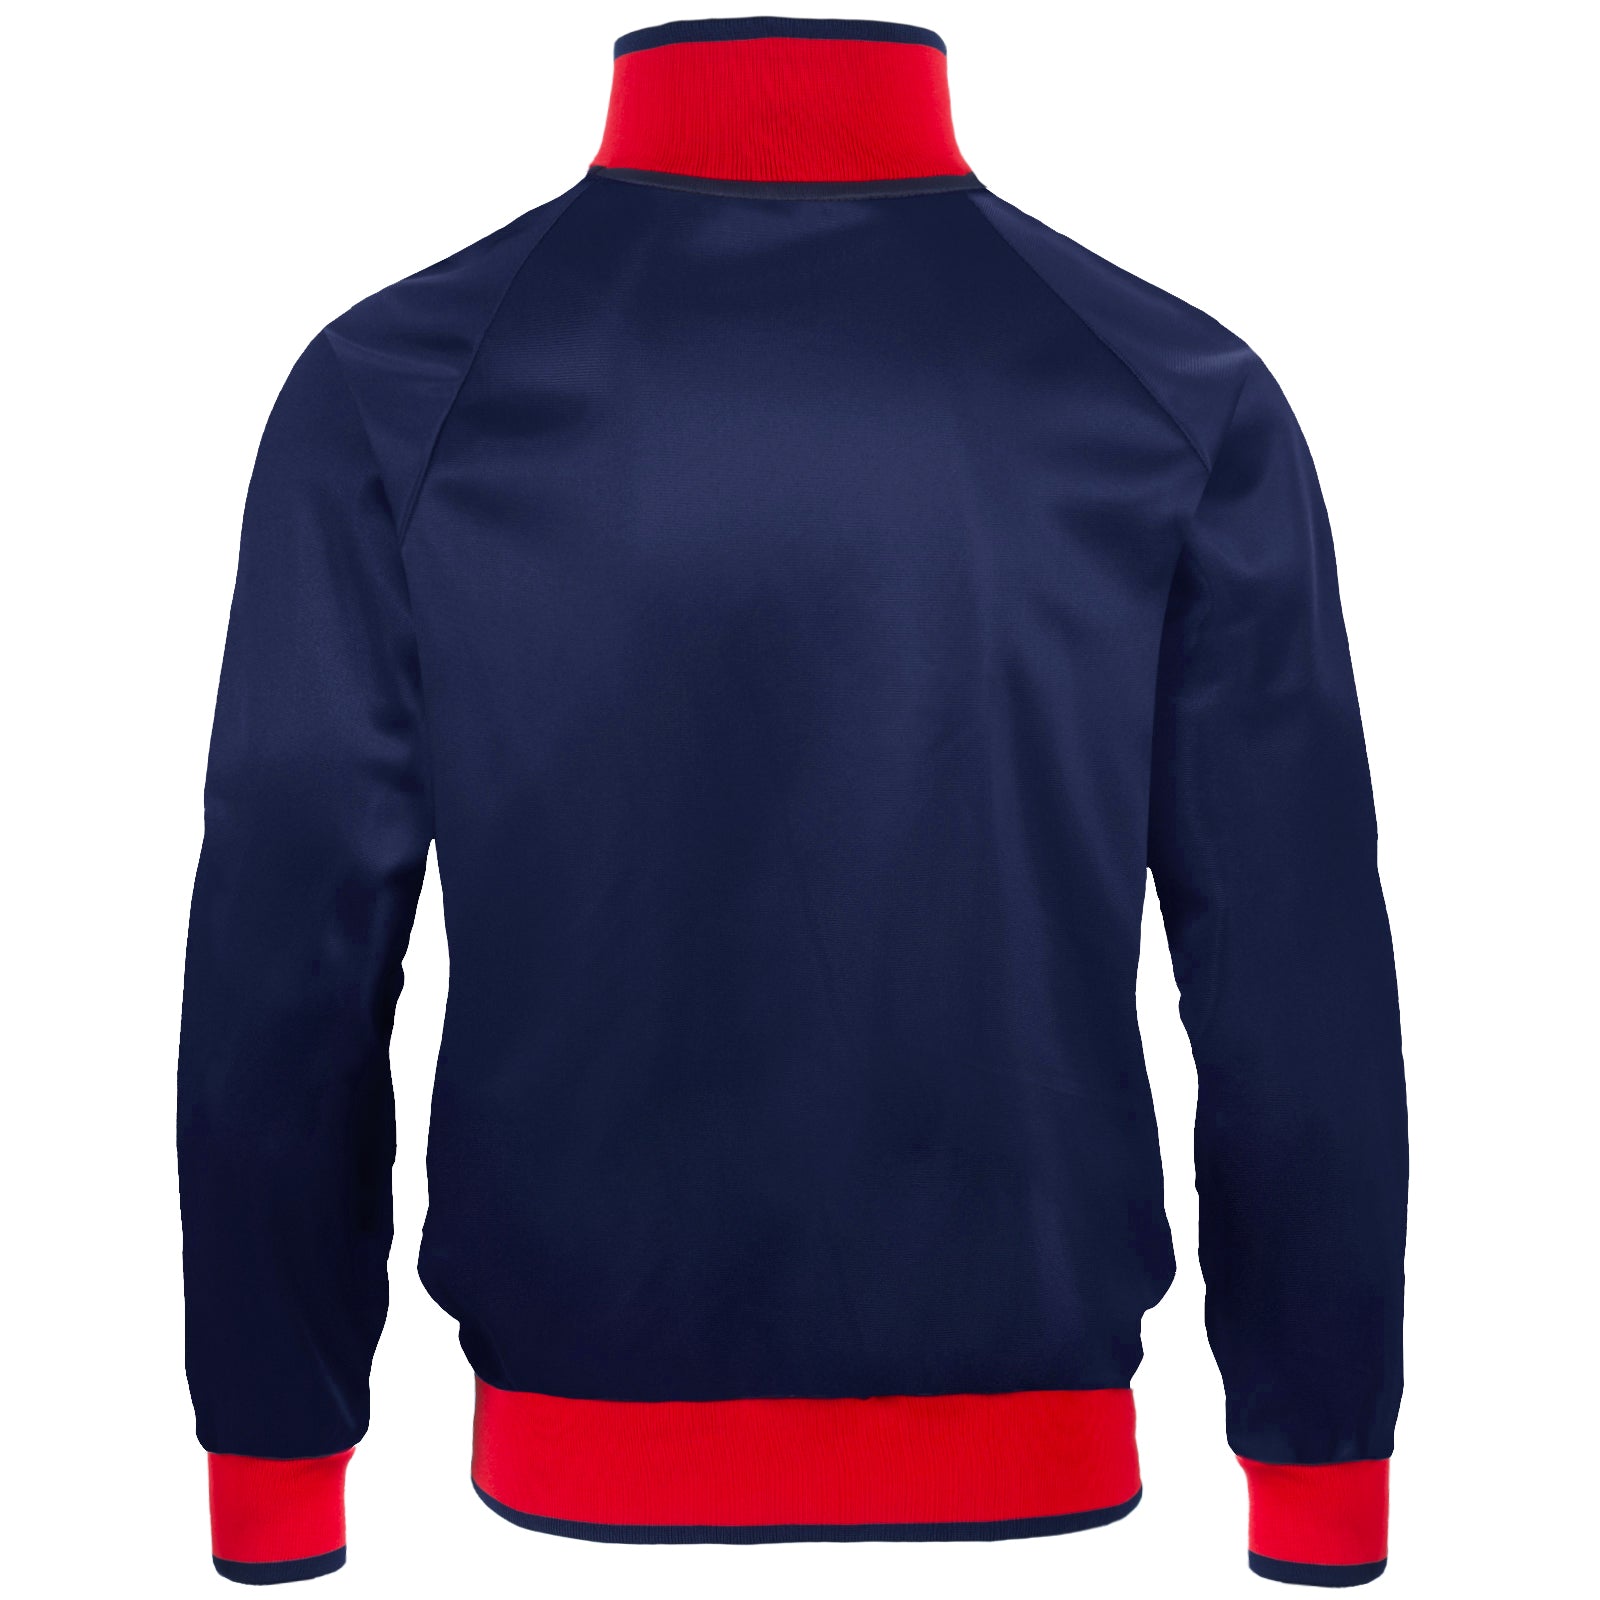 Navy/Red Sleeve